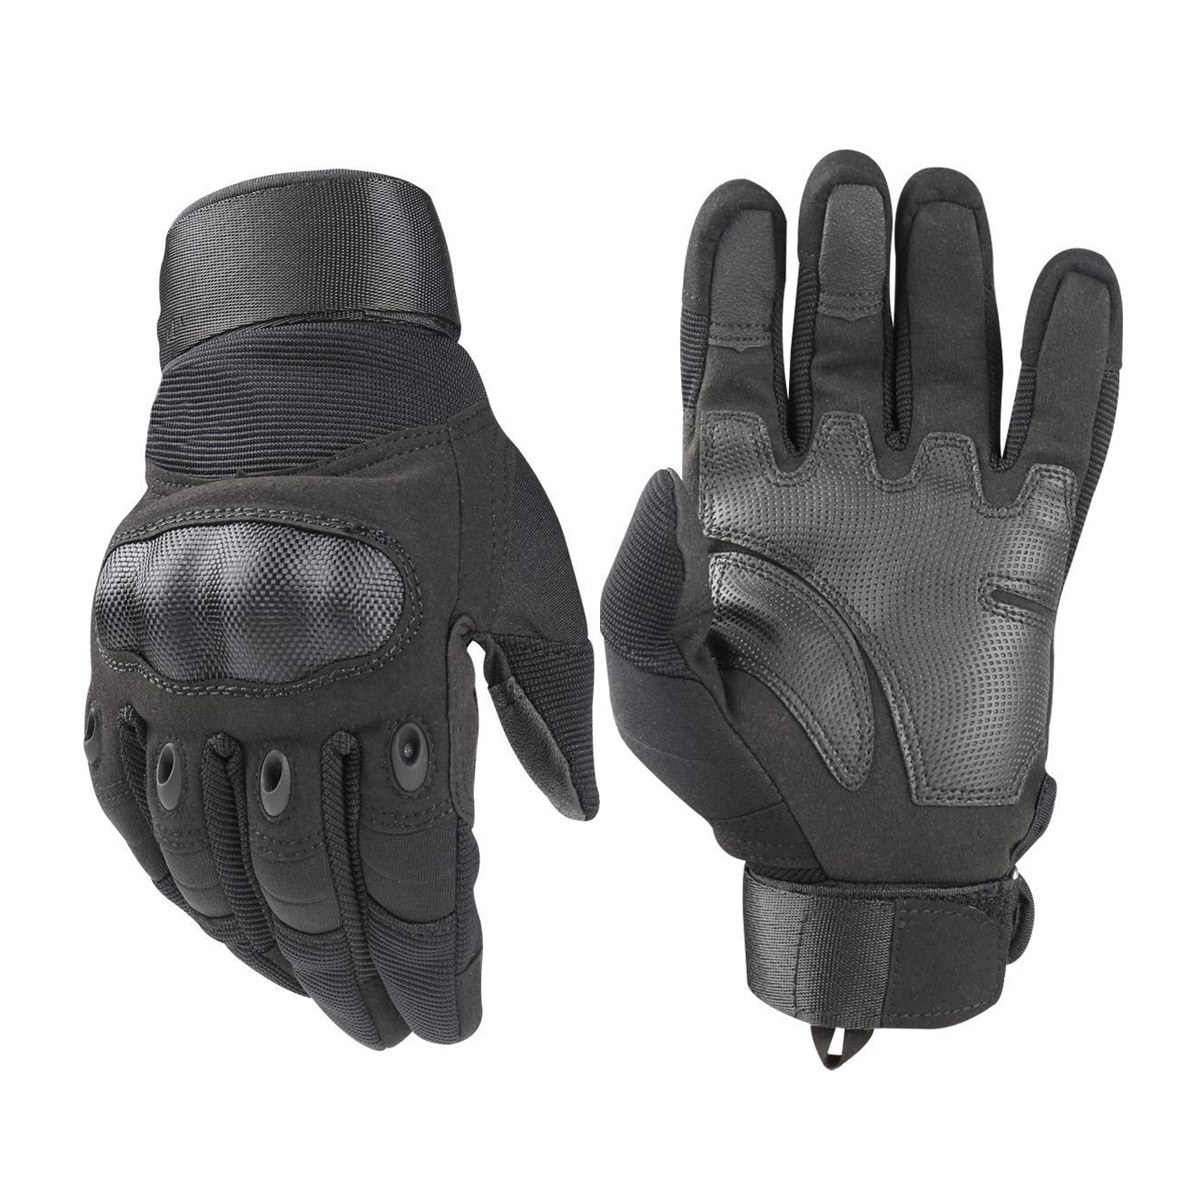 Brand New Men Motorcycle breathable Mesh Gloves